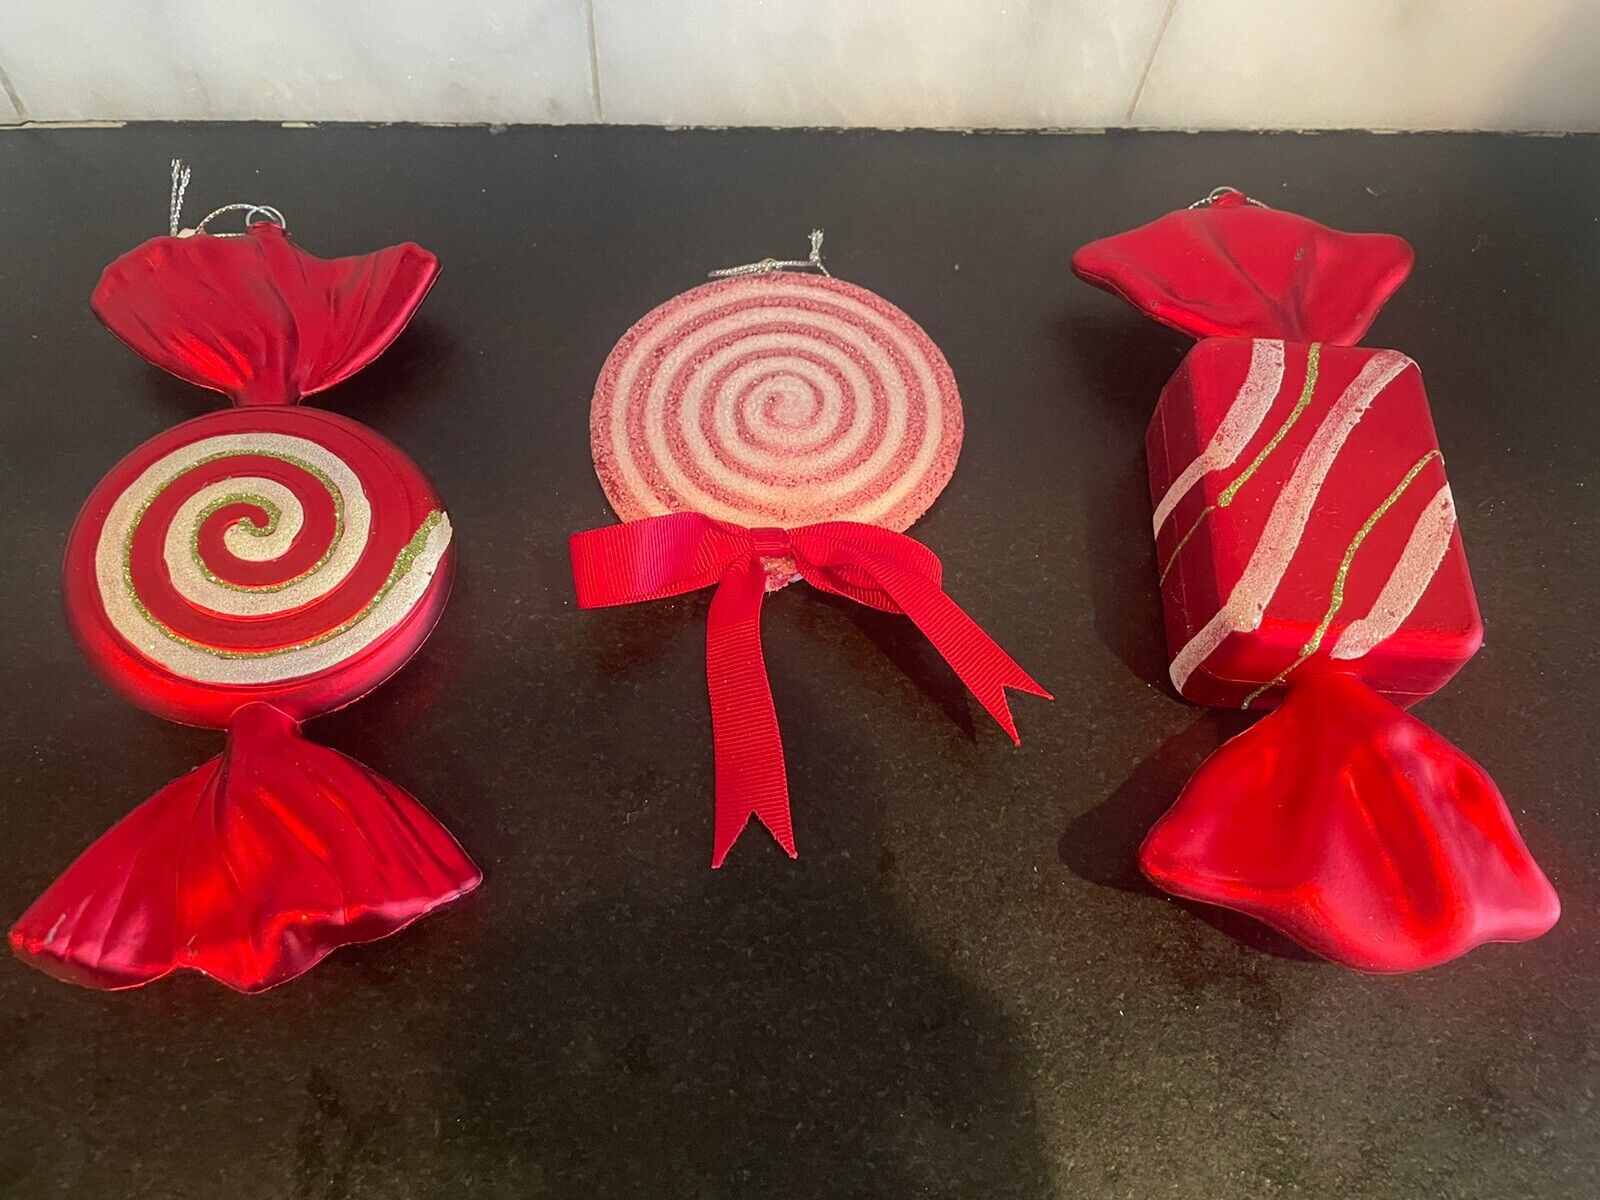 3 Large Oversized Christmas Ornaments Candy Sugarcoated Peppermint Swirl 4-6”